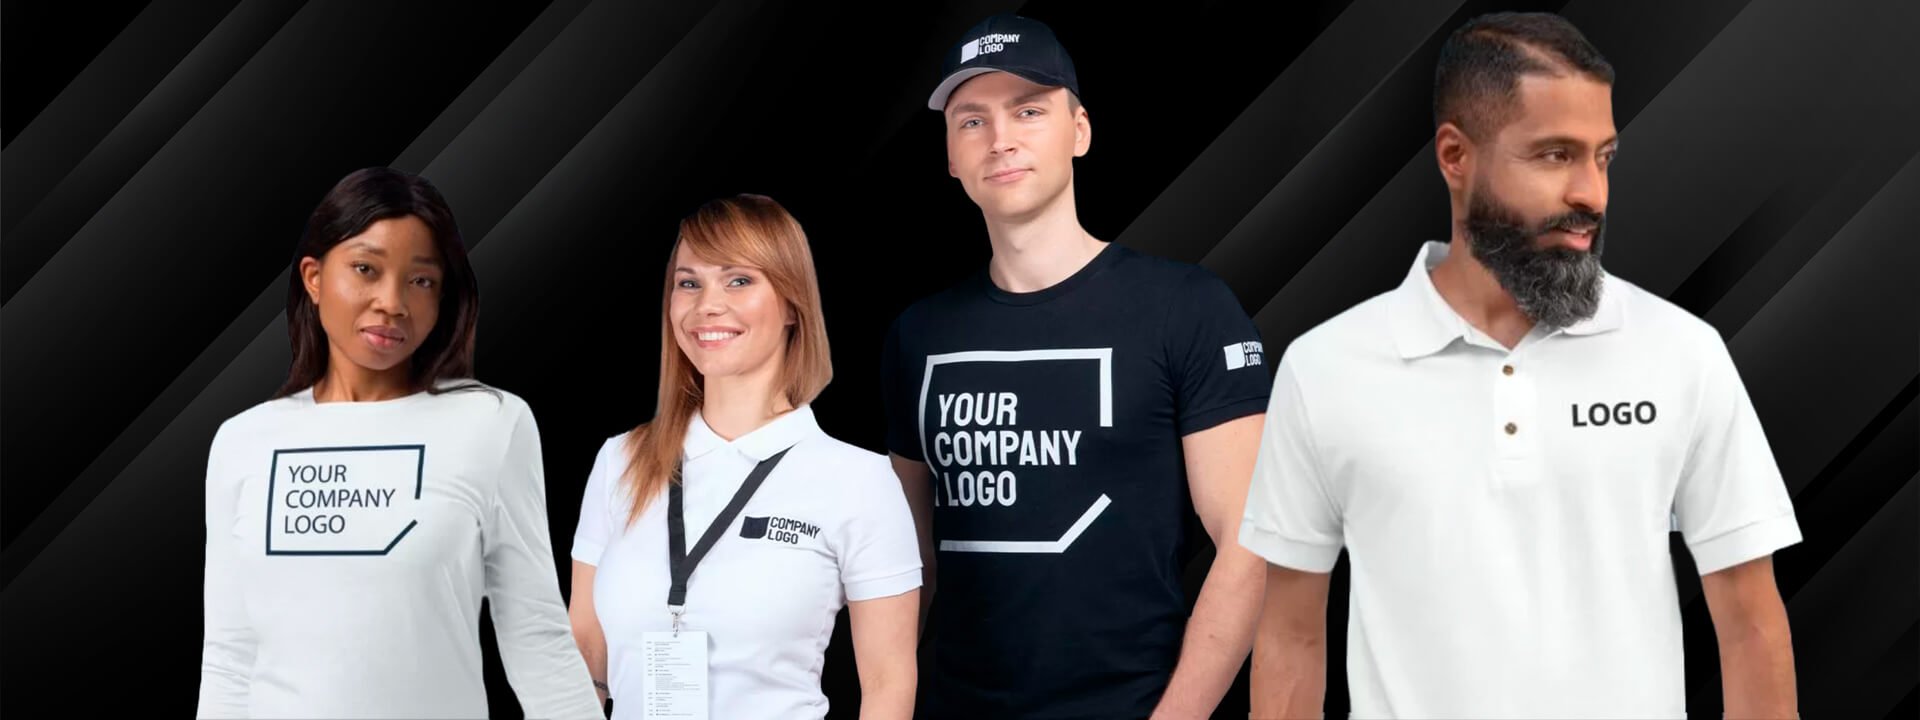 Designing company shirts is a great way to promote your brand and unite your team. From determining your goals and budget to choosing the right shirt style and material, there are many things to consider. Use our tips to create custom shirts that are functional, stylish, and effective for your business.